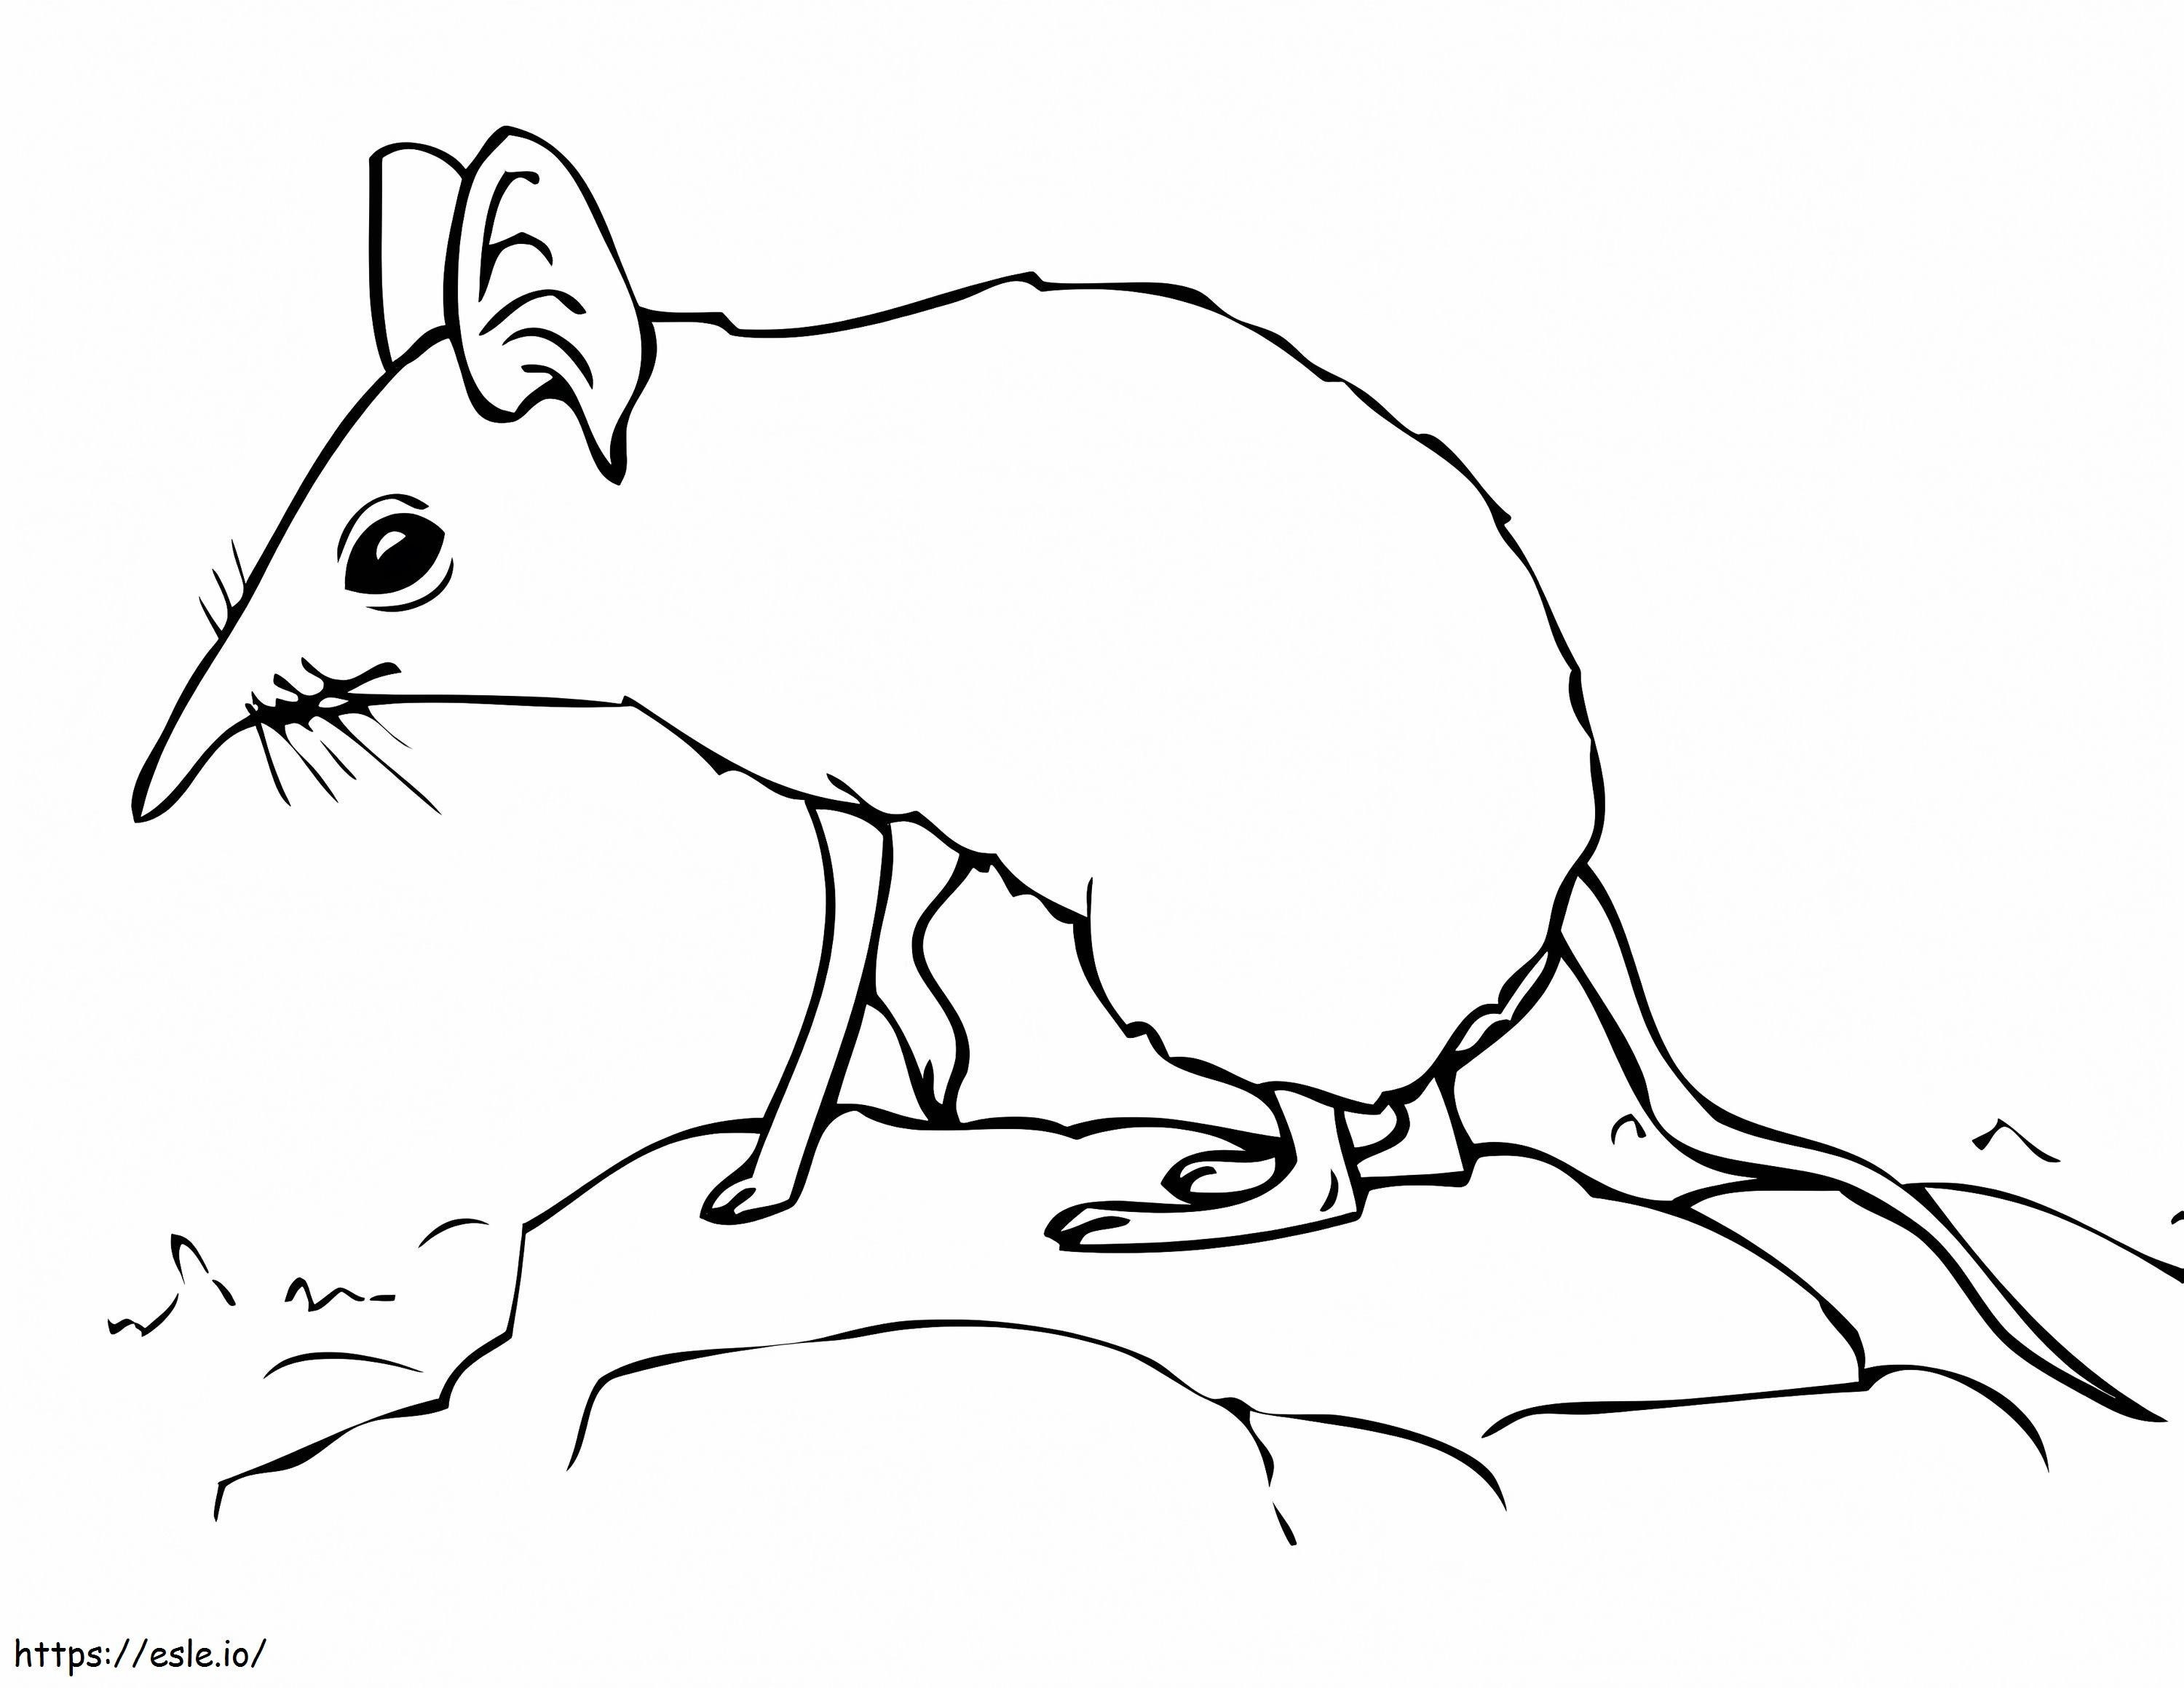 Elephant Shrew coloring page